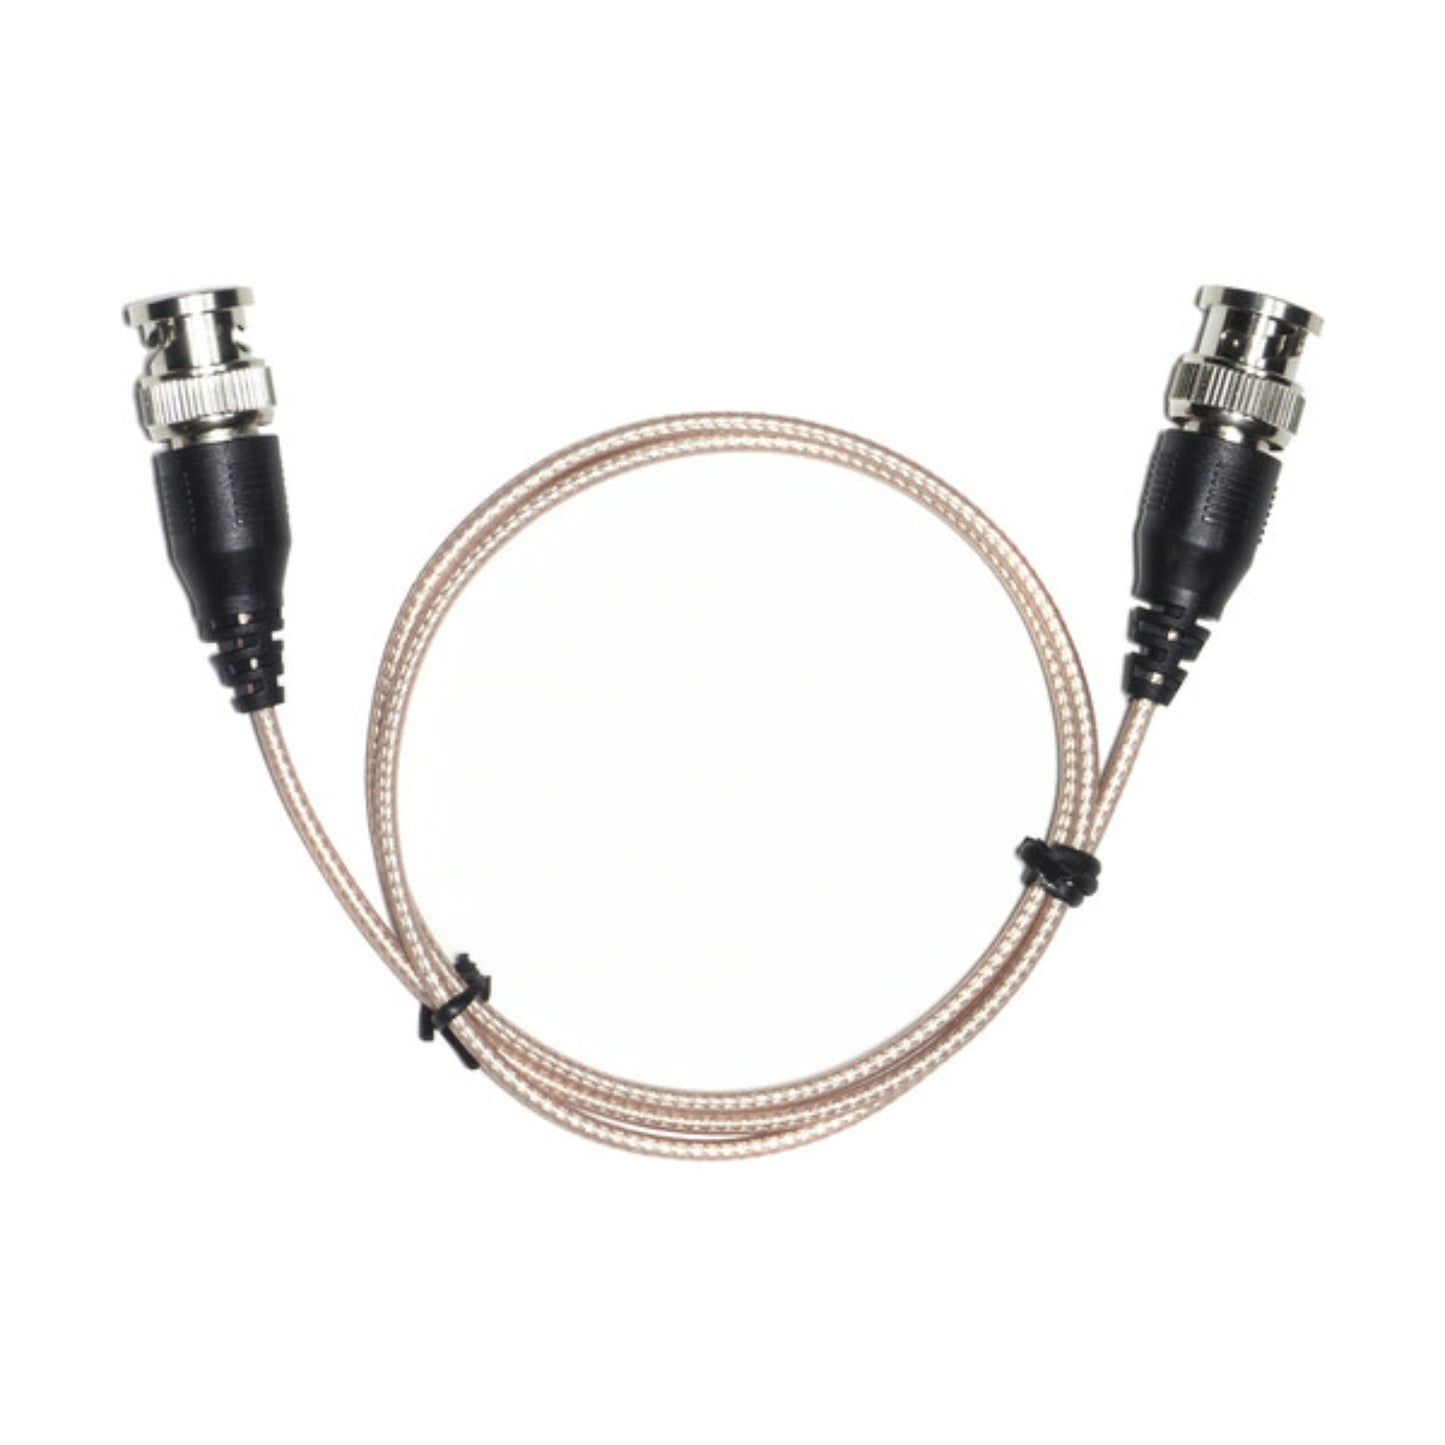 Buy SmallHD Thin BNC Cable At Topic Store